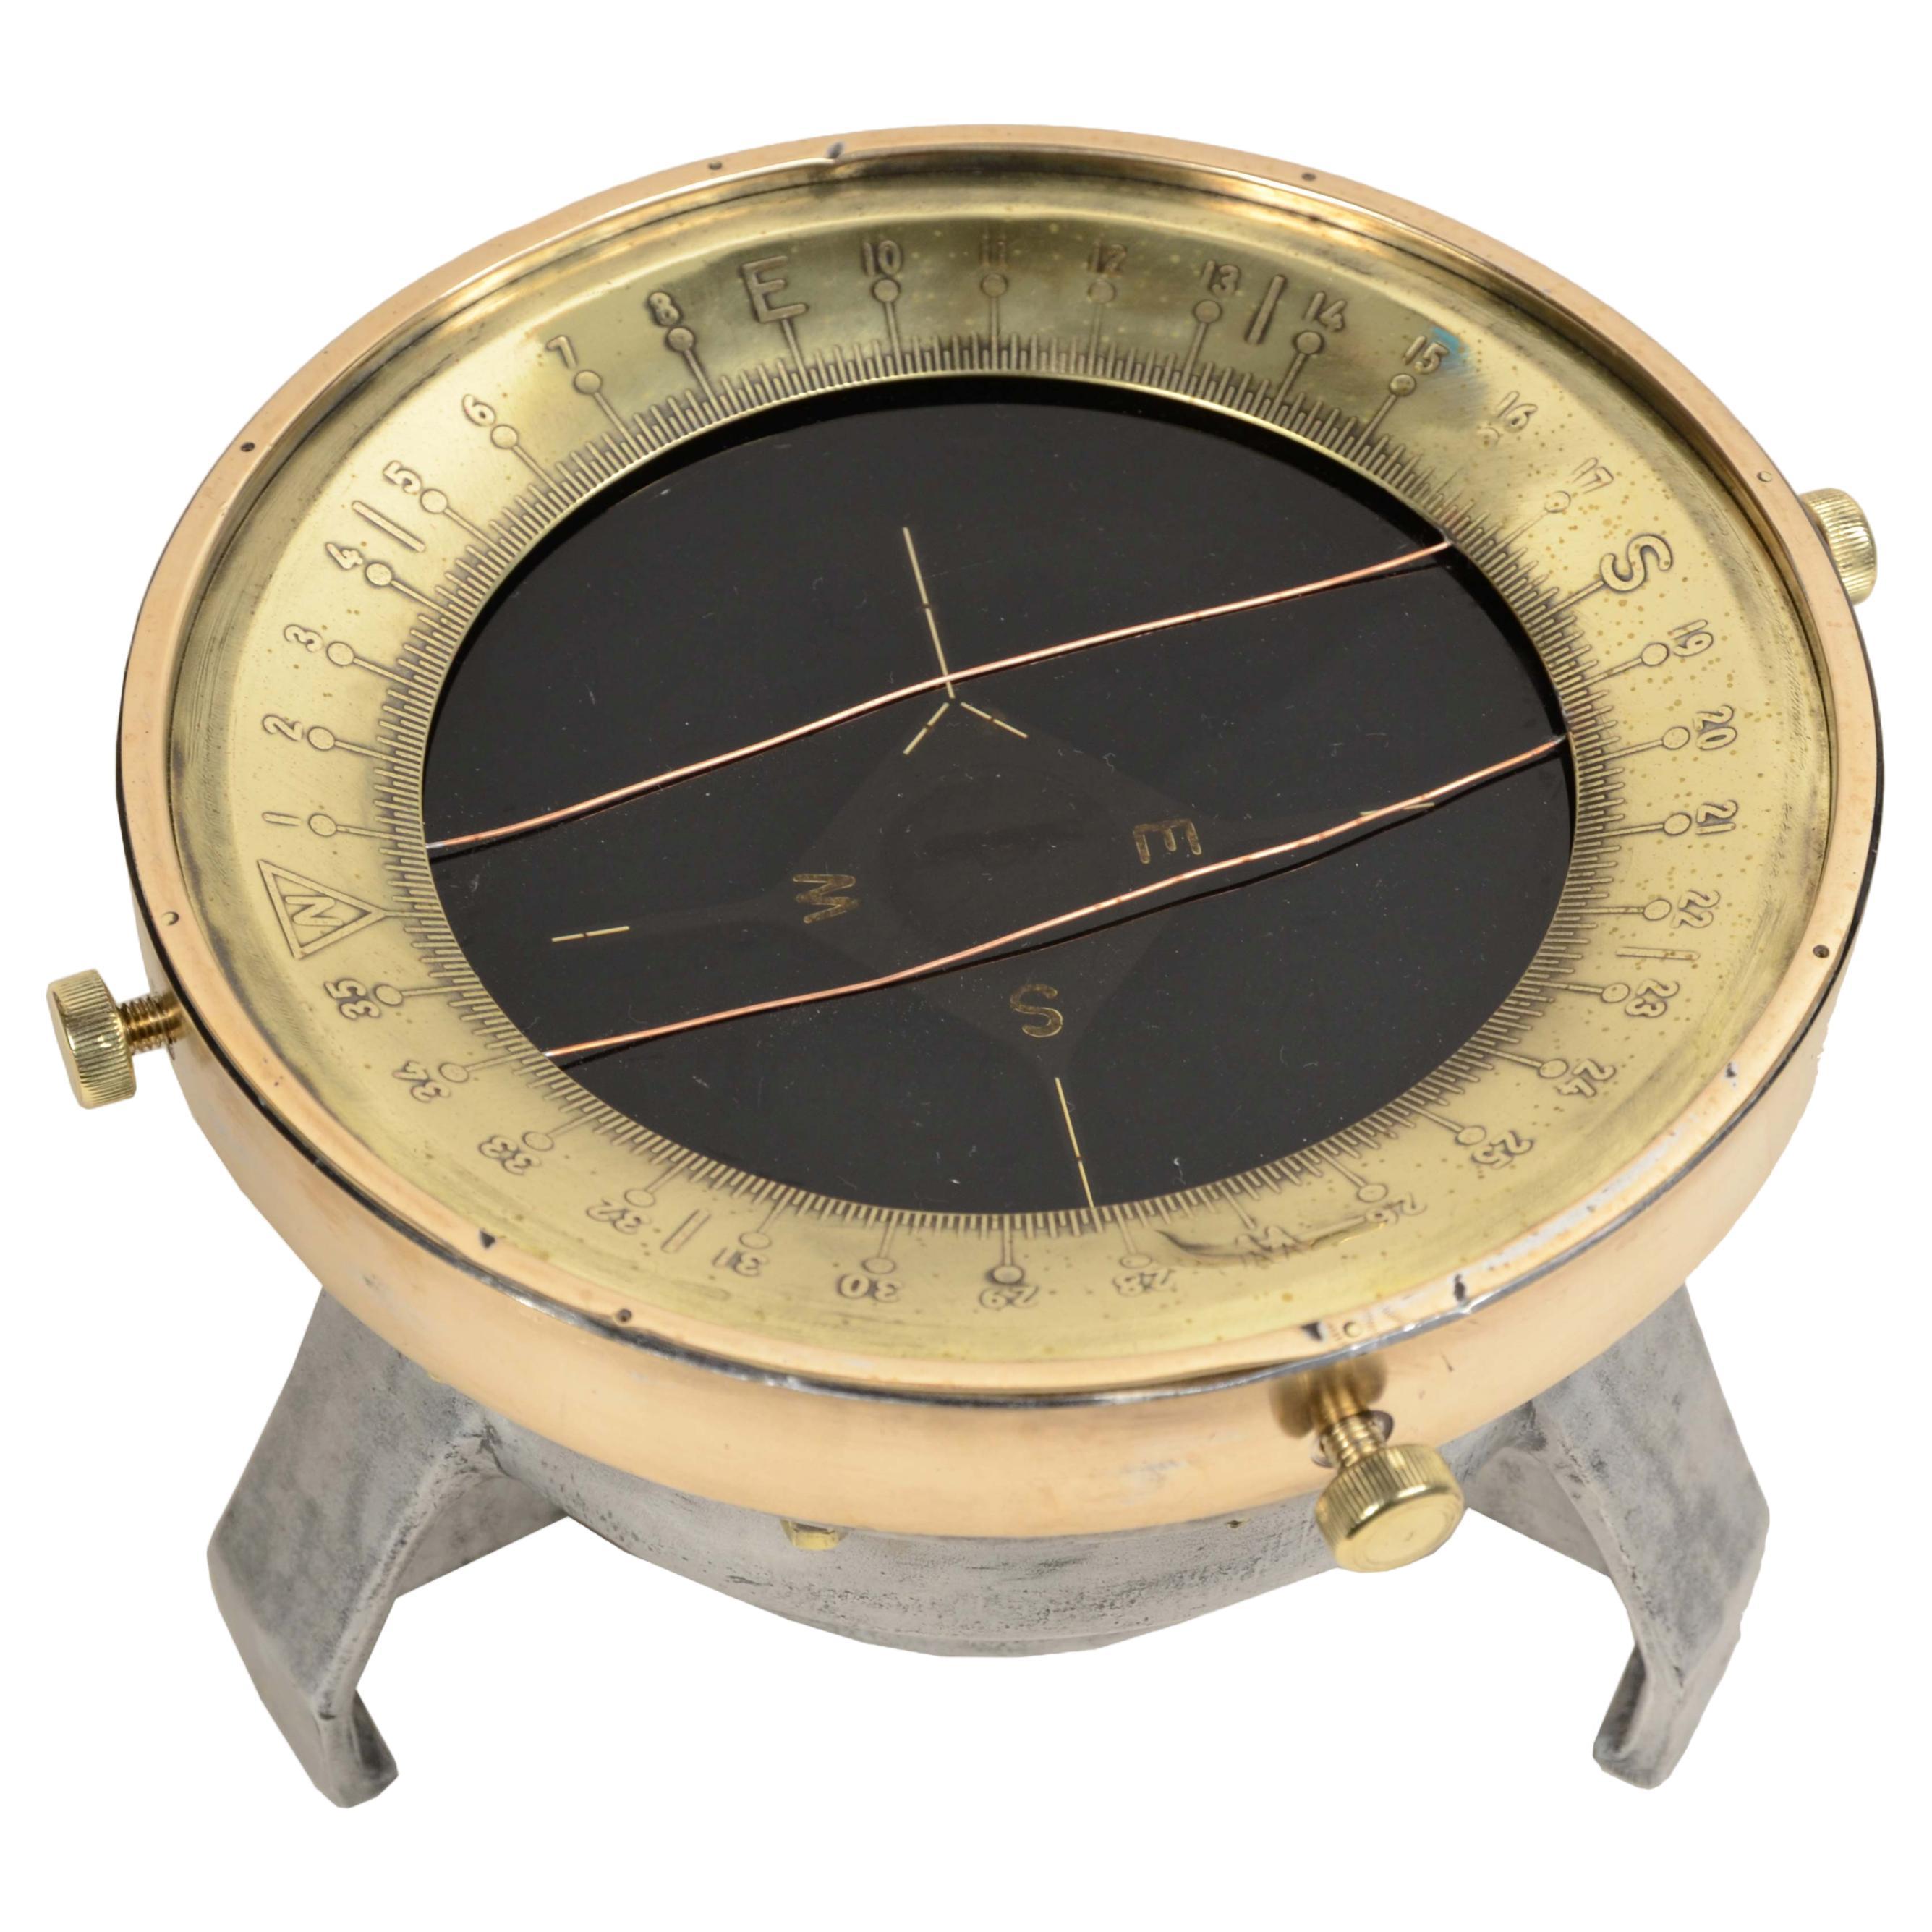 Brass and aluminum aviation compass complete with azimuth circle 1940 U.S.A For Sale